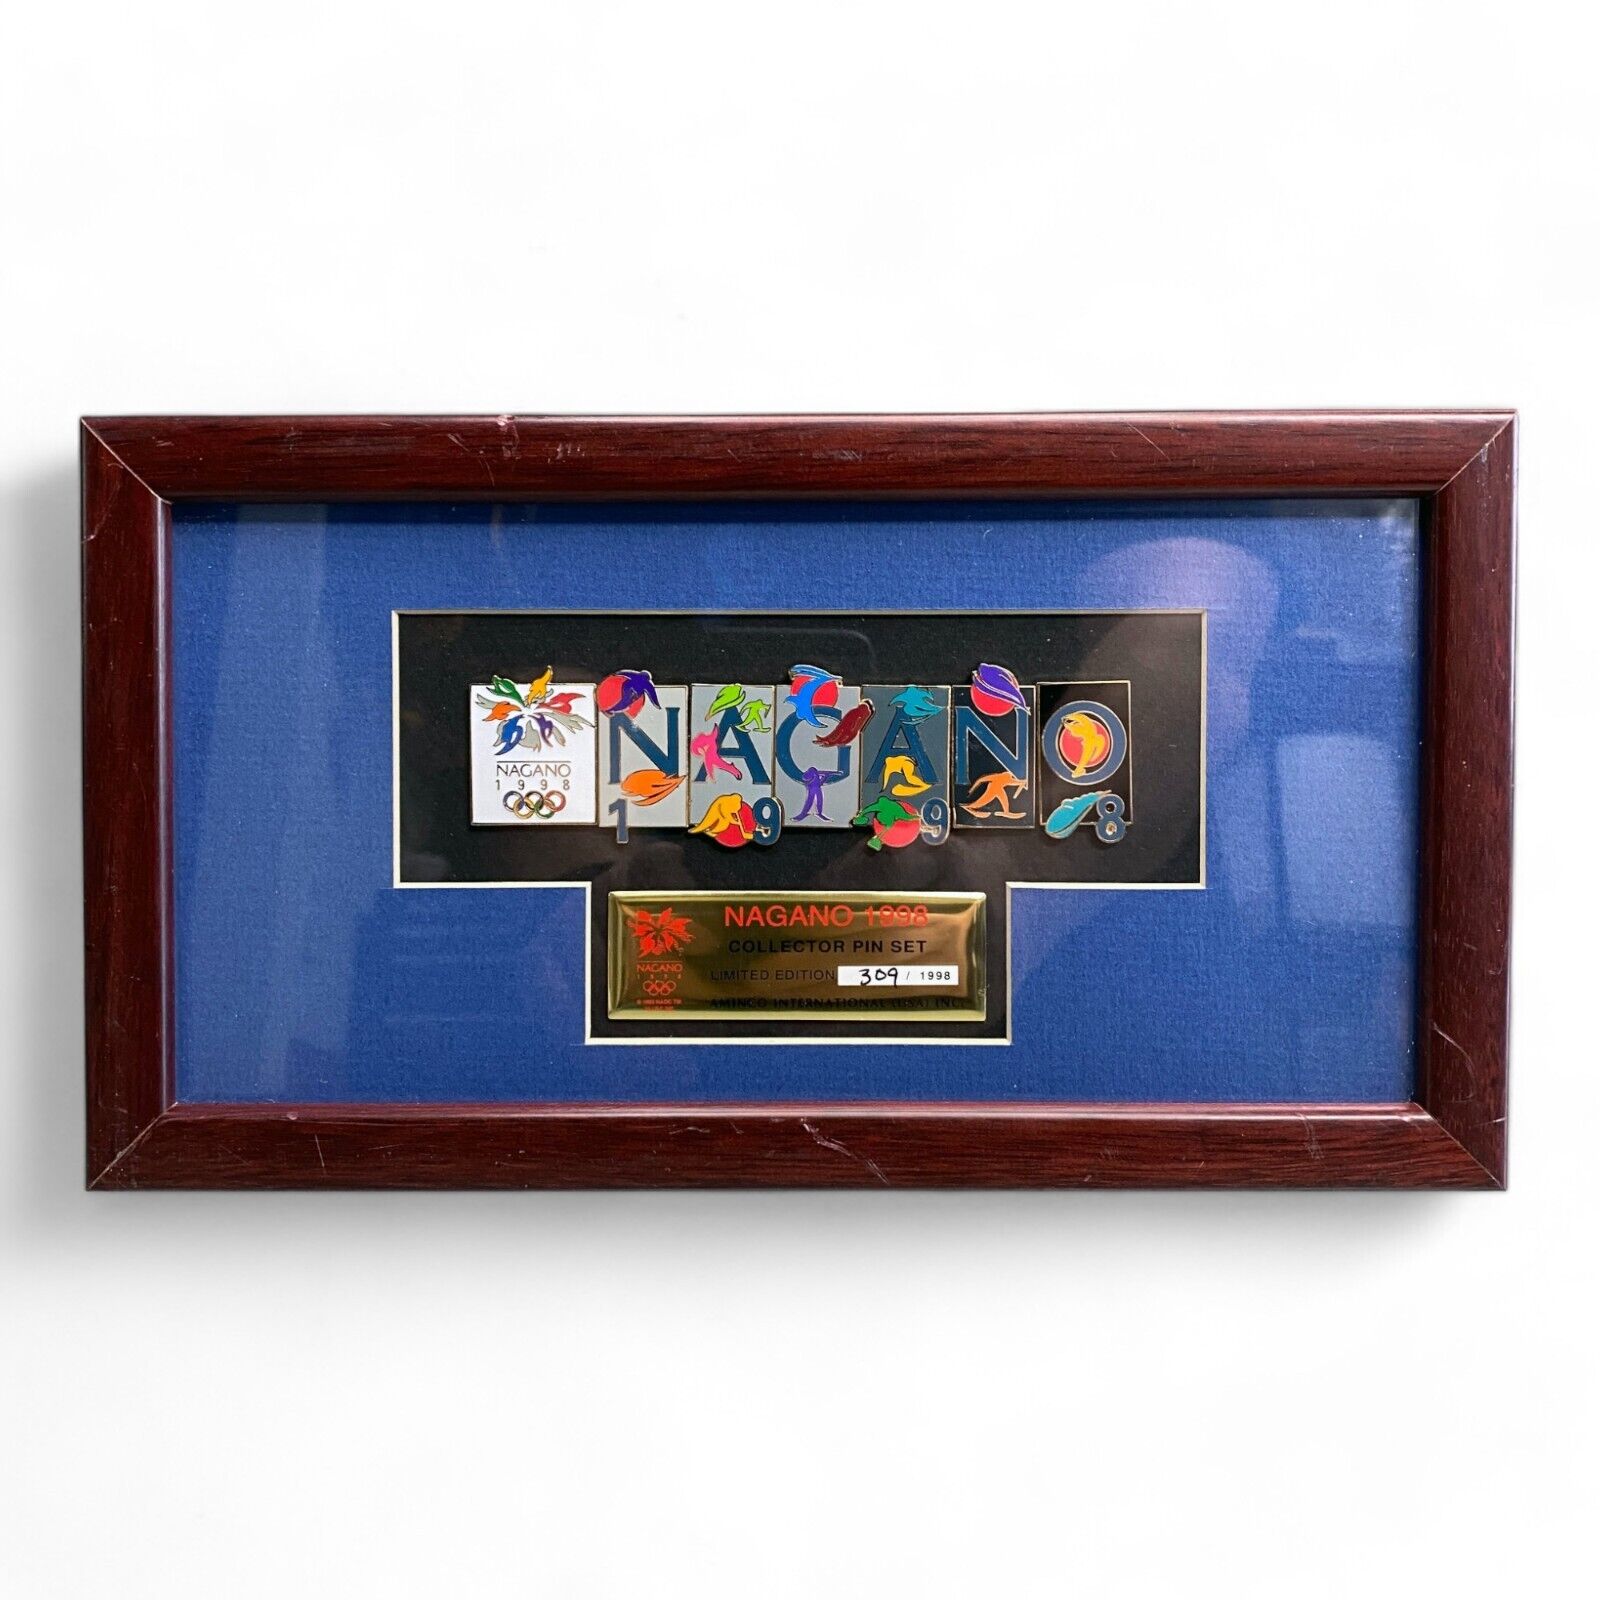 Nagano Winter Olympics Framed  COLLECTOR 7 PIN SET Limited Edition #309/1998